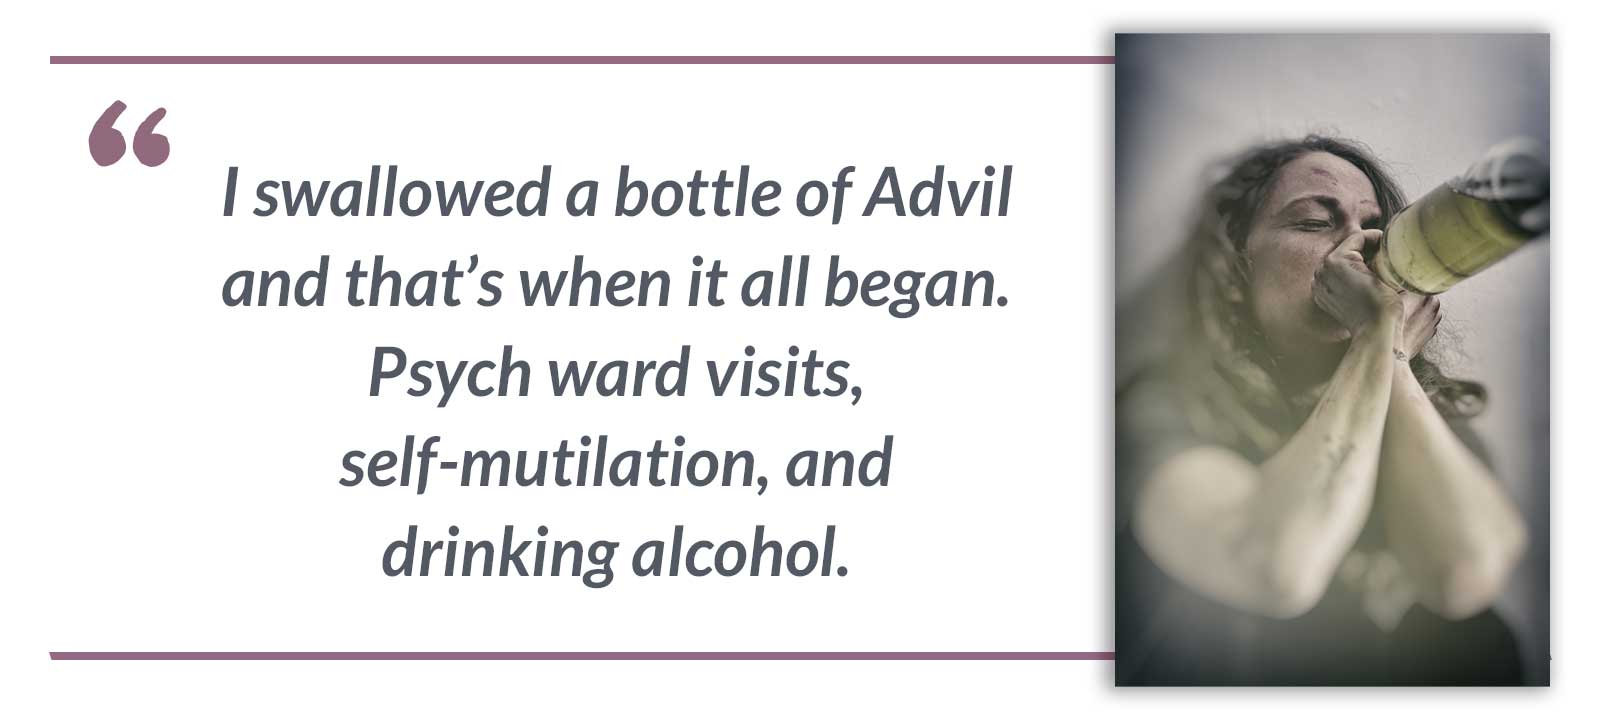 I swallowed a bottle of Advil and that’s when it all began. Psych ward visits, self-mutilation, and drinking alcohol.-Mariah